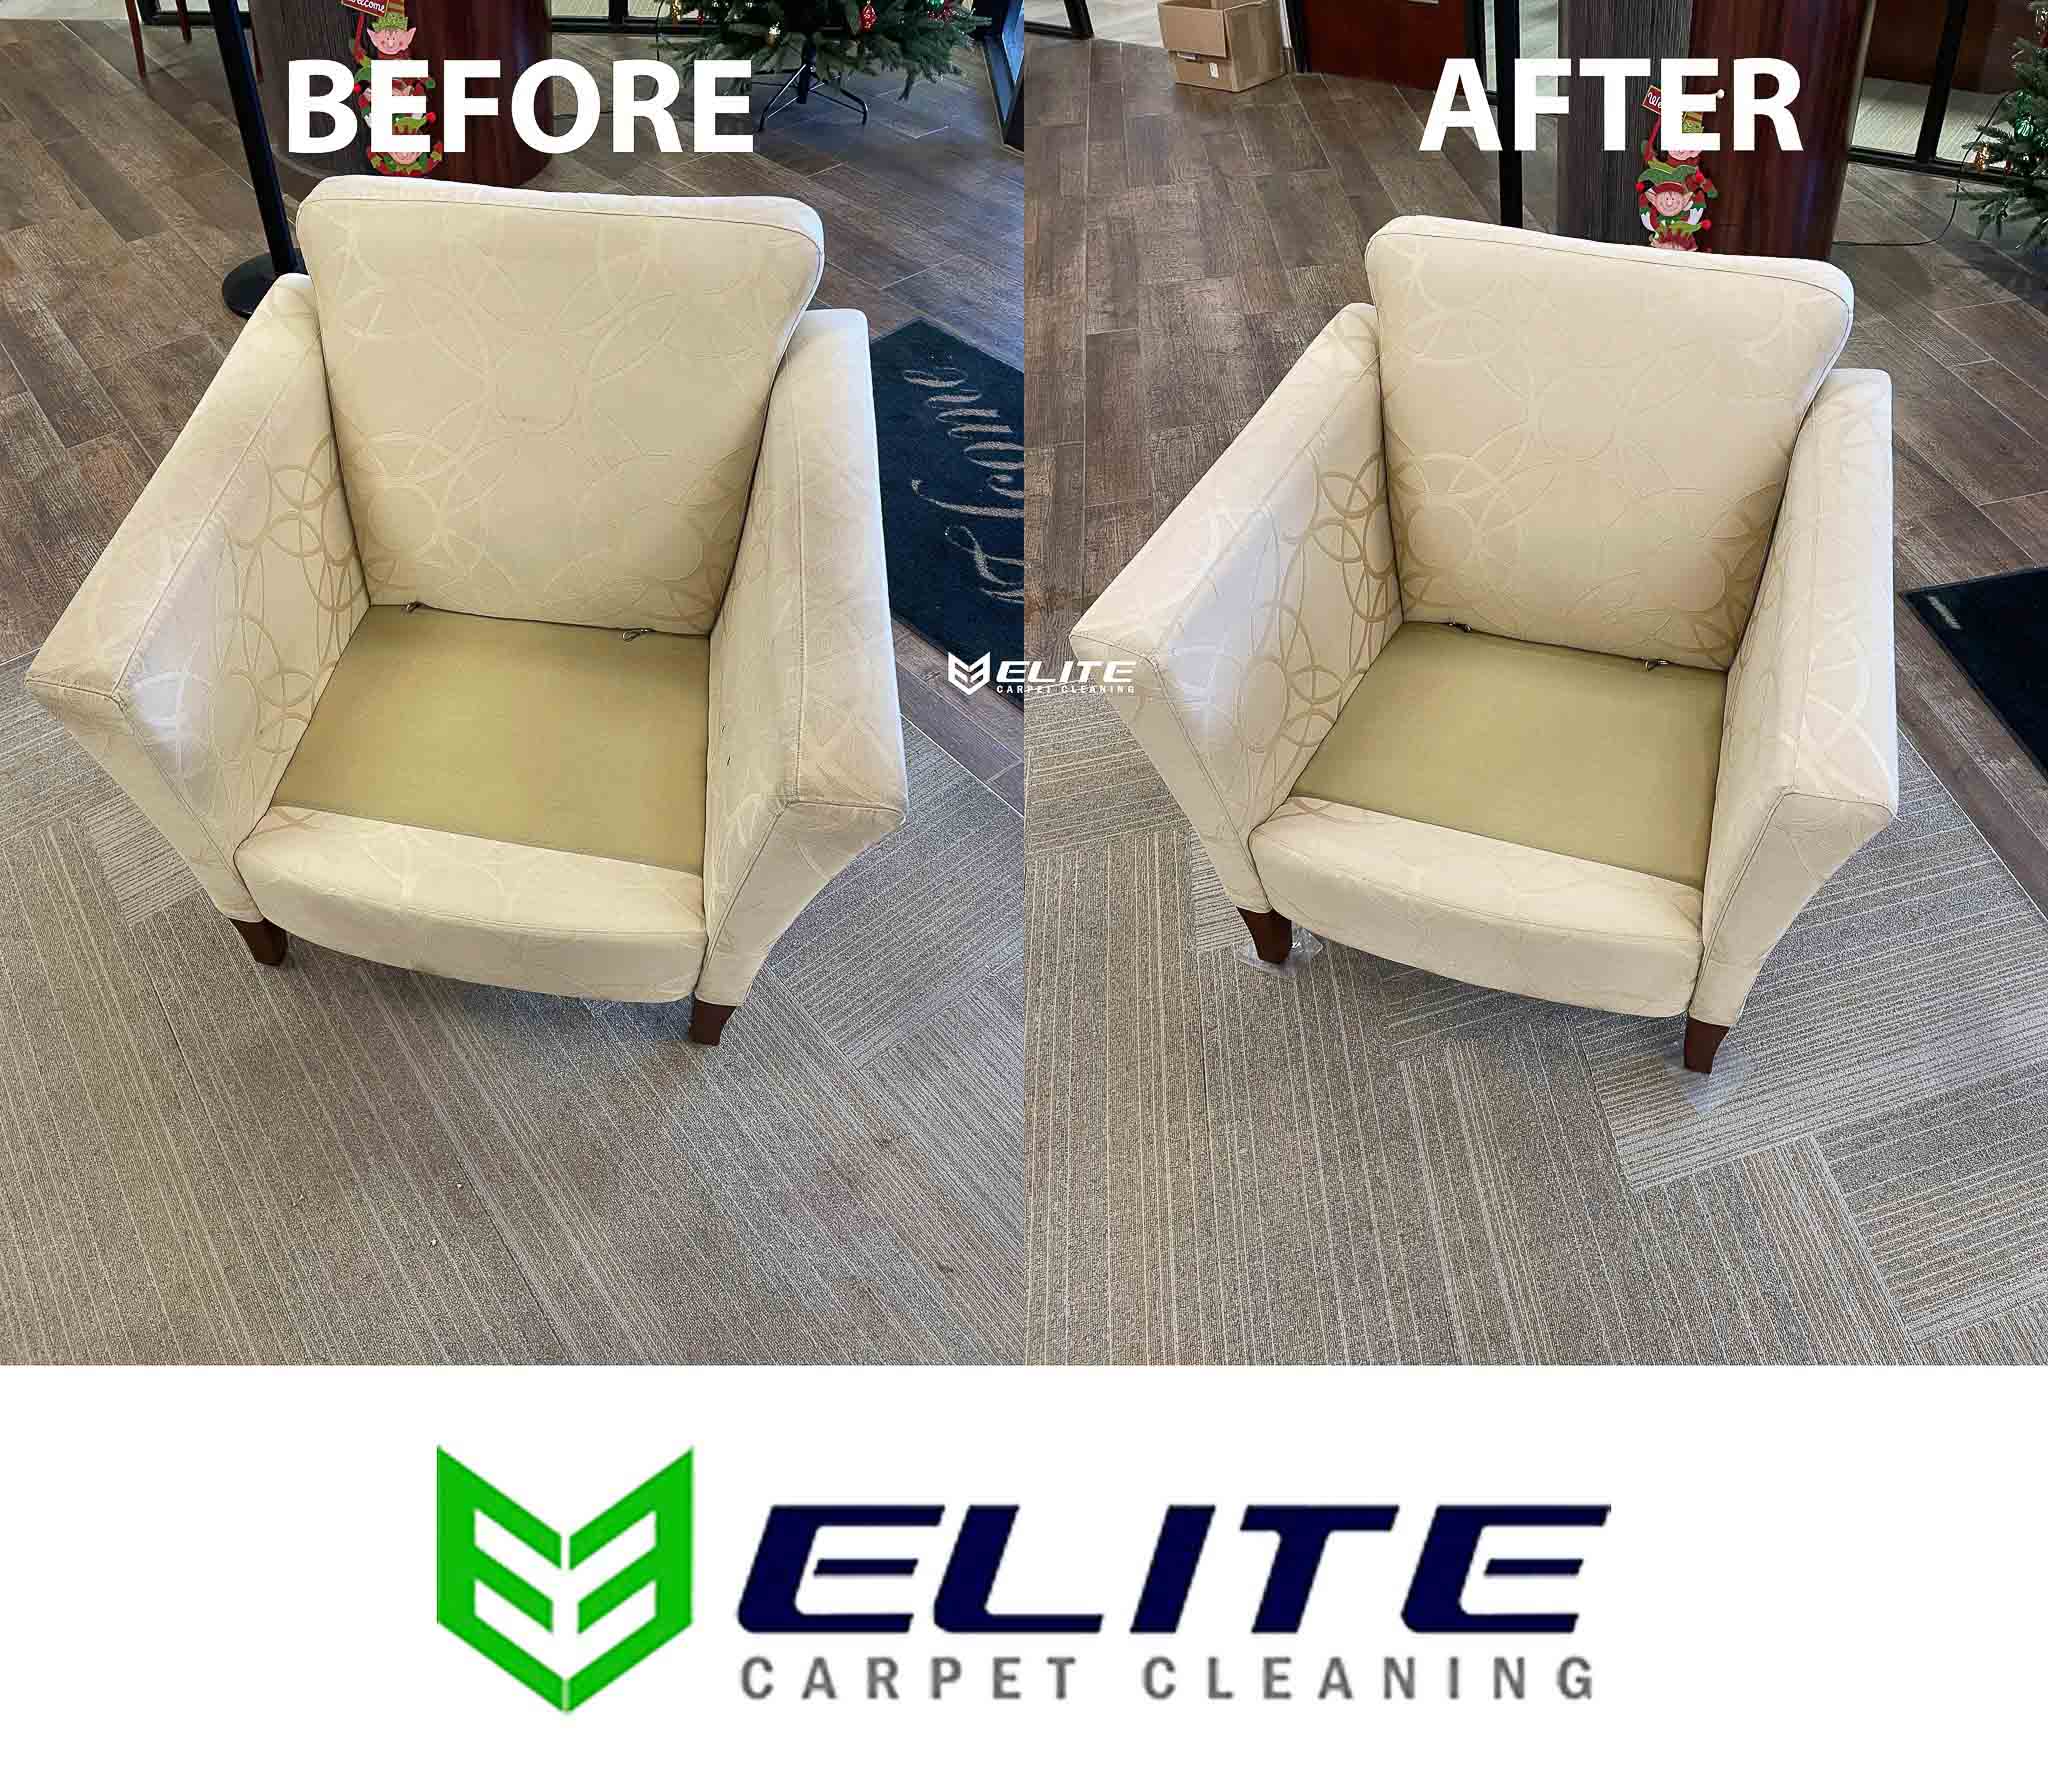 White Chair with clean upholstery in Andrews tx. This chair was cleaned by Elite Carpet cleaning.